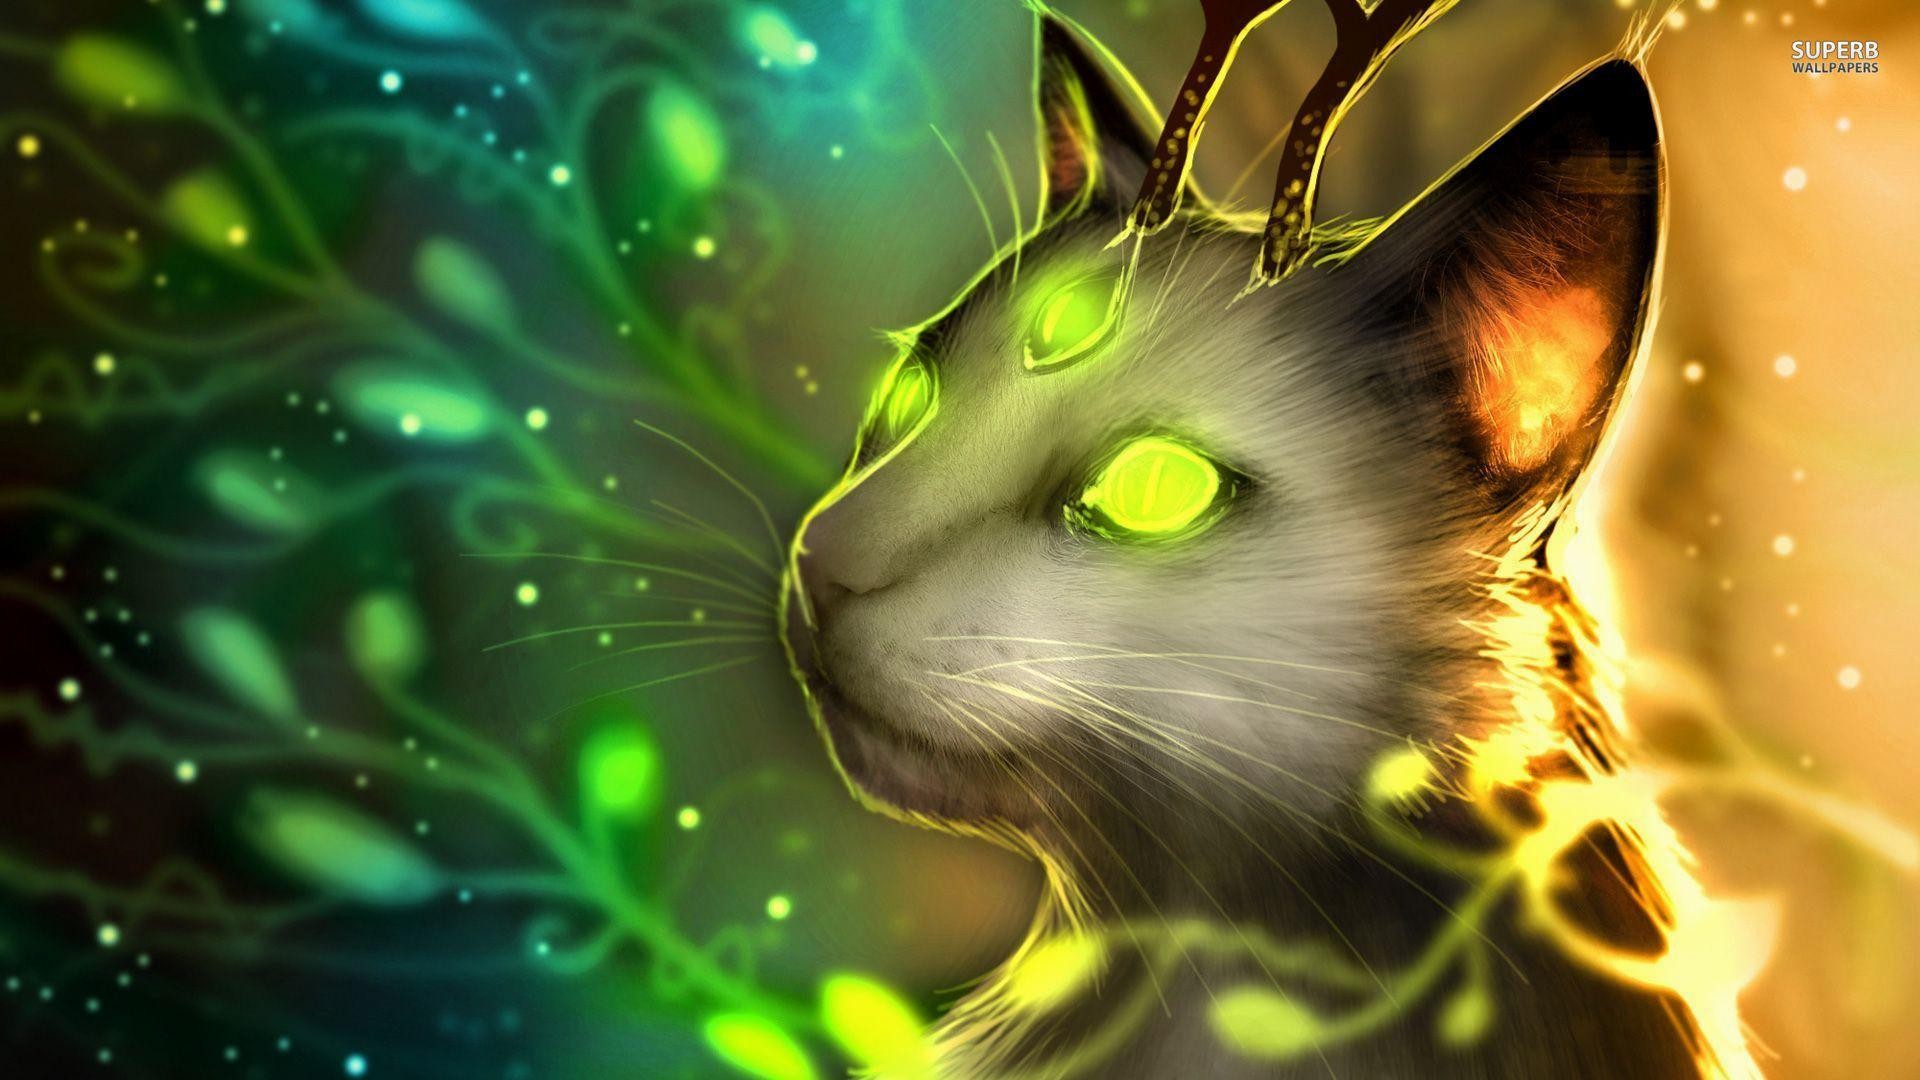 Warrior Cats wallpaper ·① Download free awesome High Resolution ...